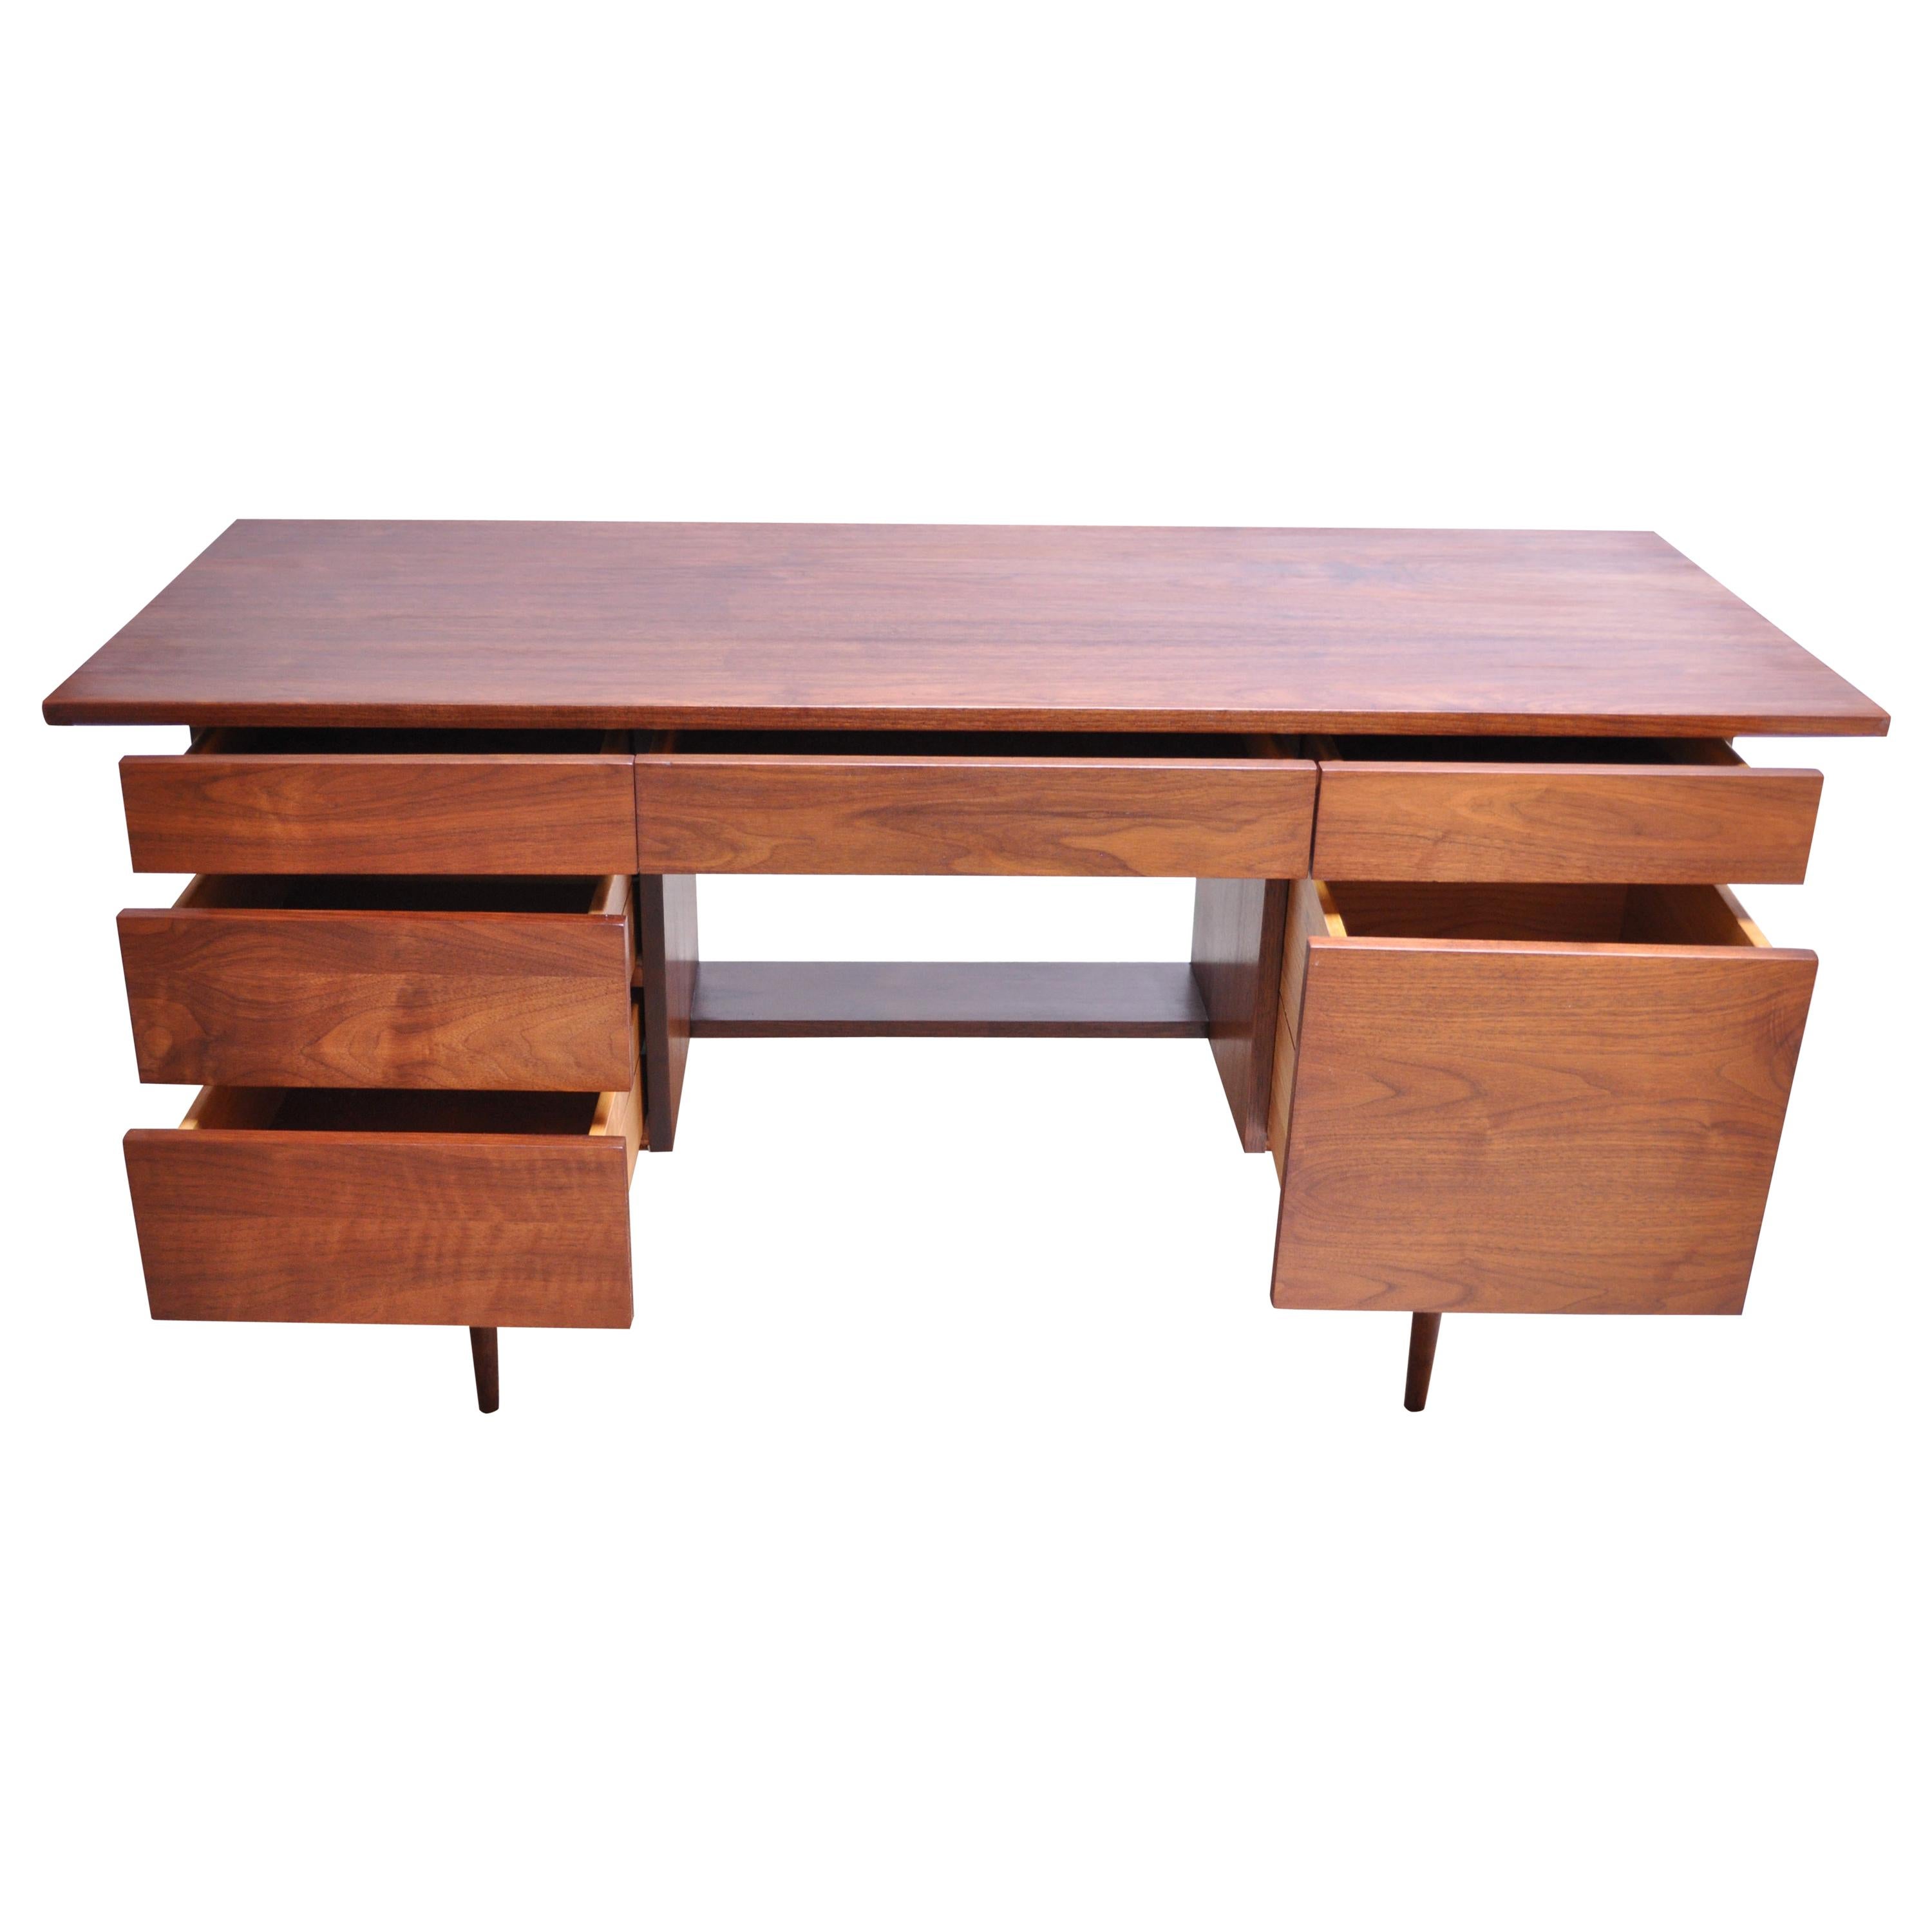 Minimal walnut student desk designed and manufactured by Mel Smilow in the 1950s. Offers ample storage with a row of three shallow drawers on top, one lower pull-out writing surface on the right side, and three larger lower drawers (two on the left